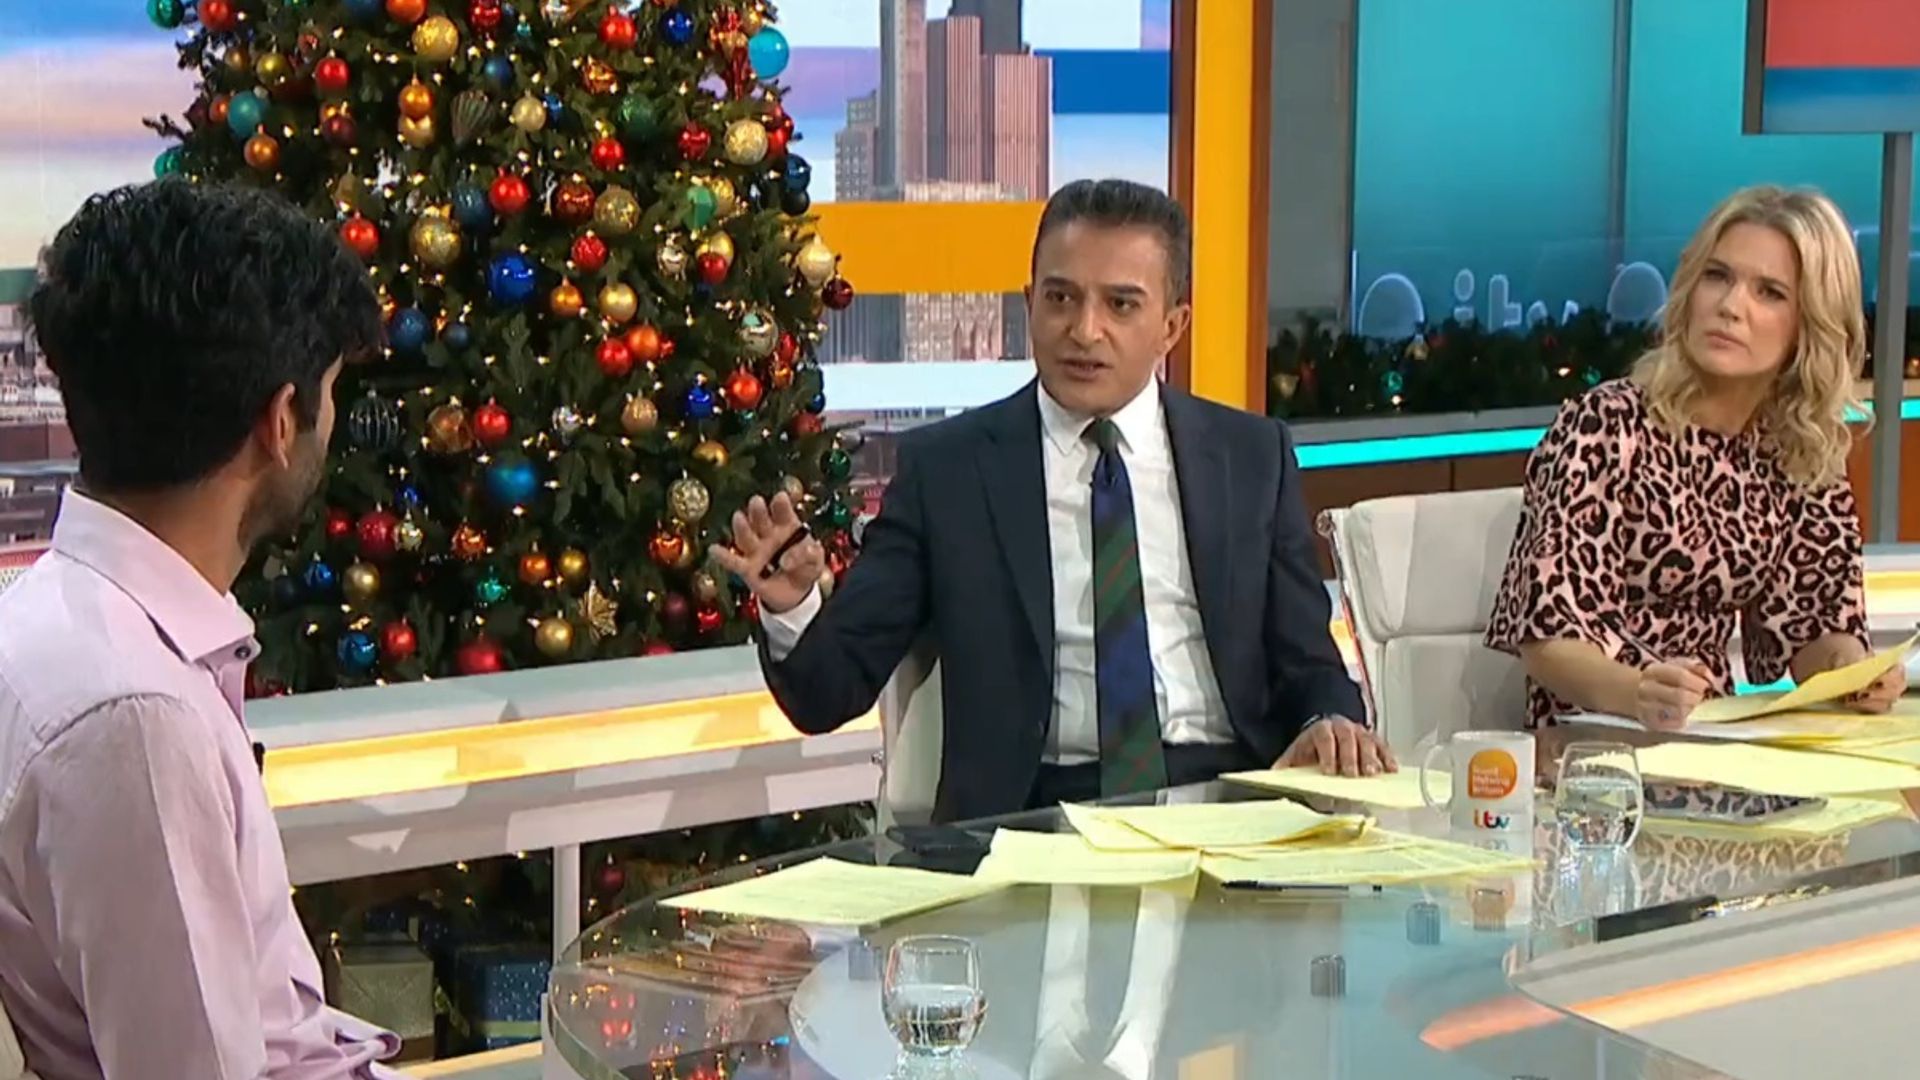 Good Morning Britain viewers complain as technical issue silences guest